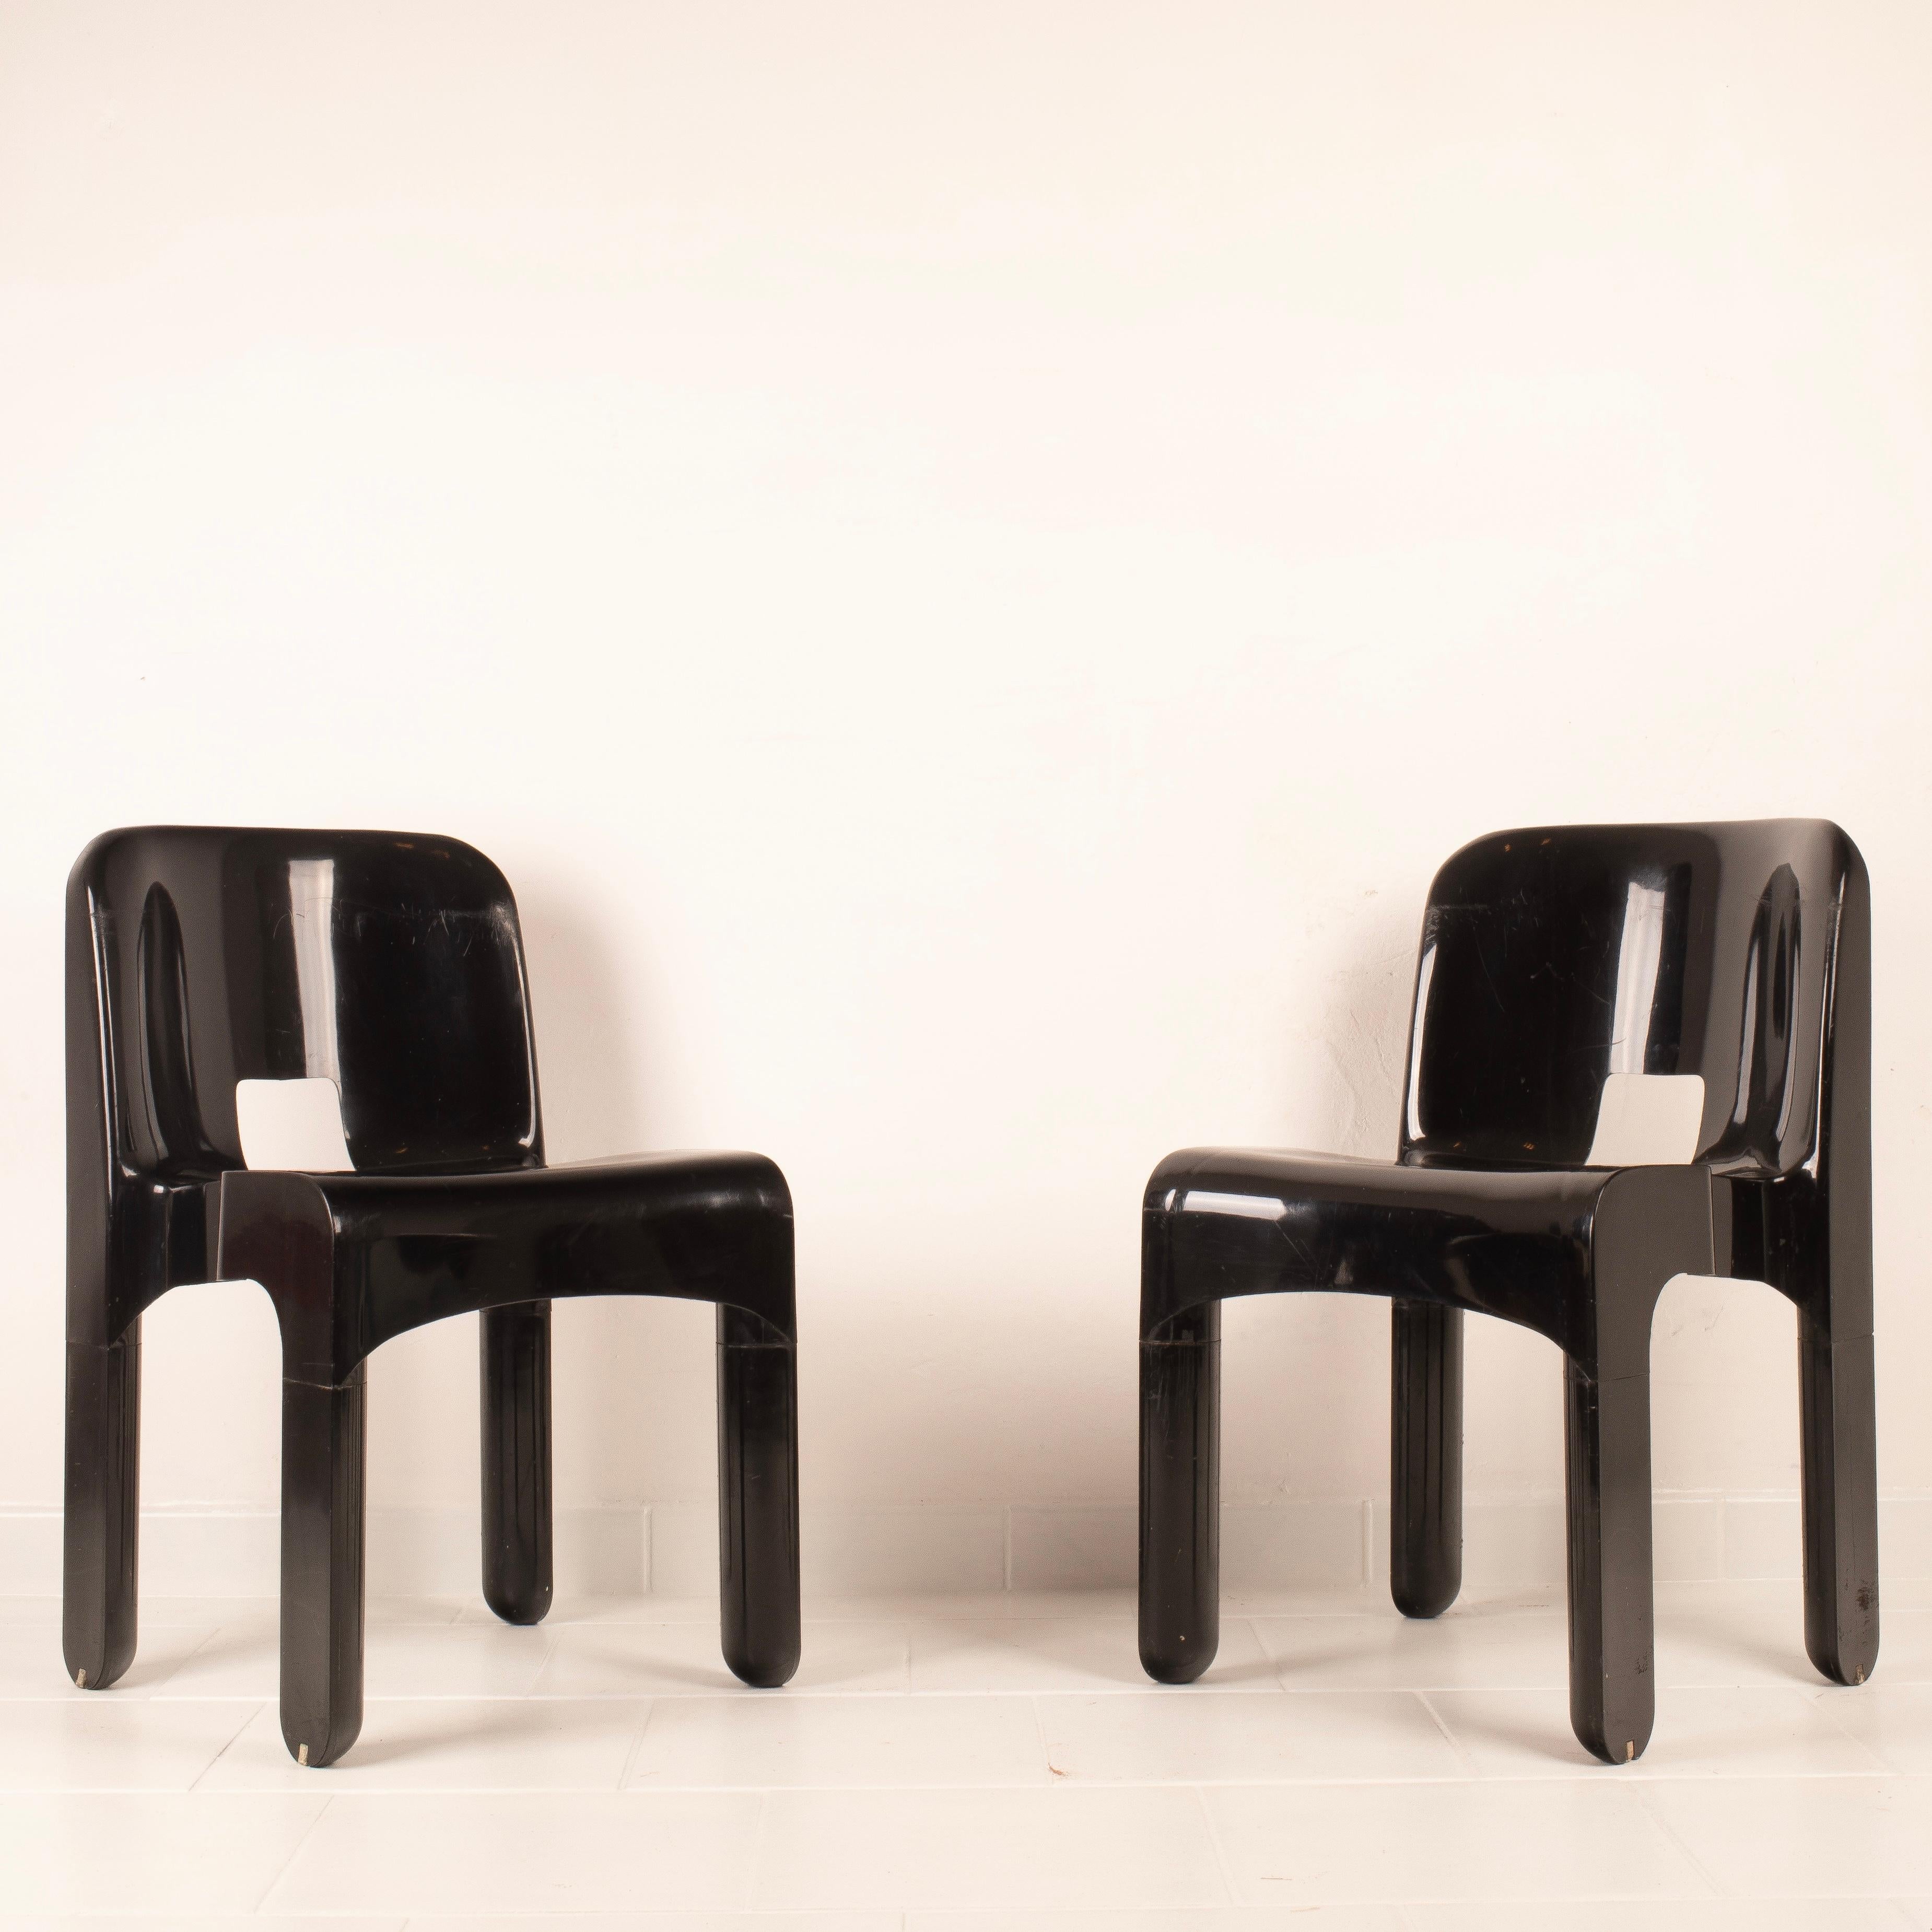 Pair of Universal Chairs 4869 Black by Joe Colombo for Kartell In Good Condition For Sale In Conversano, IT